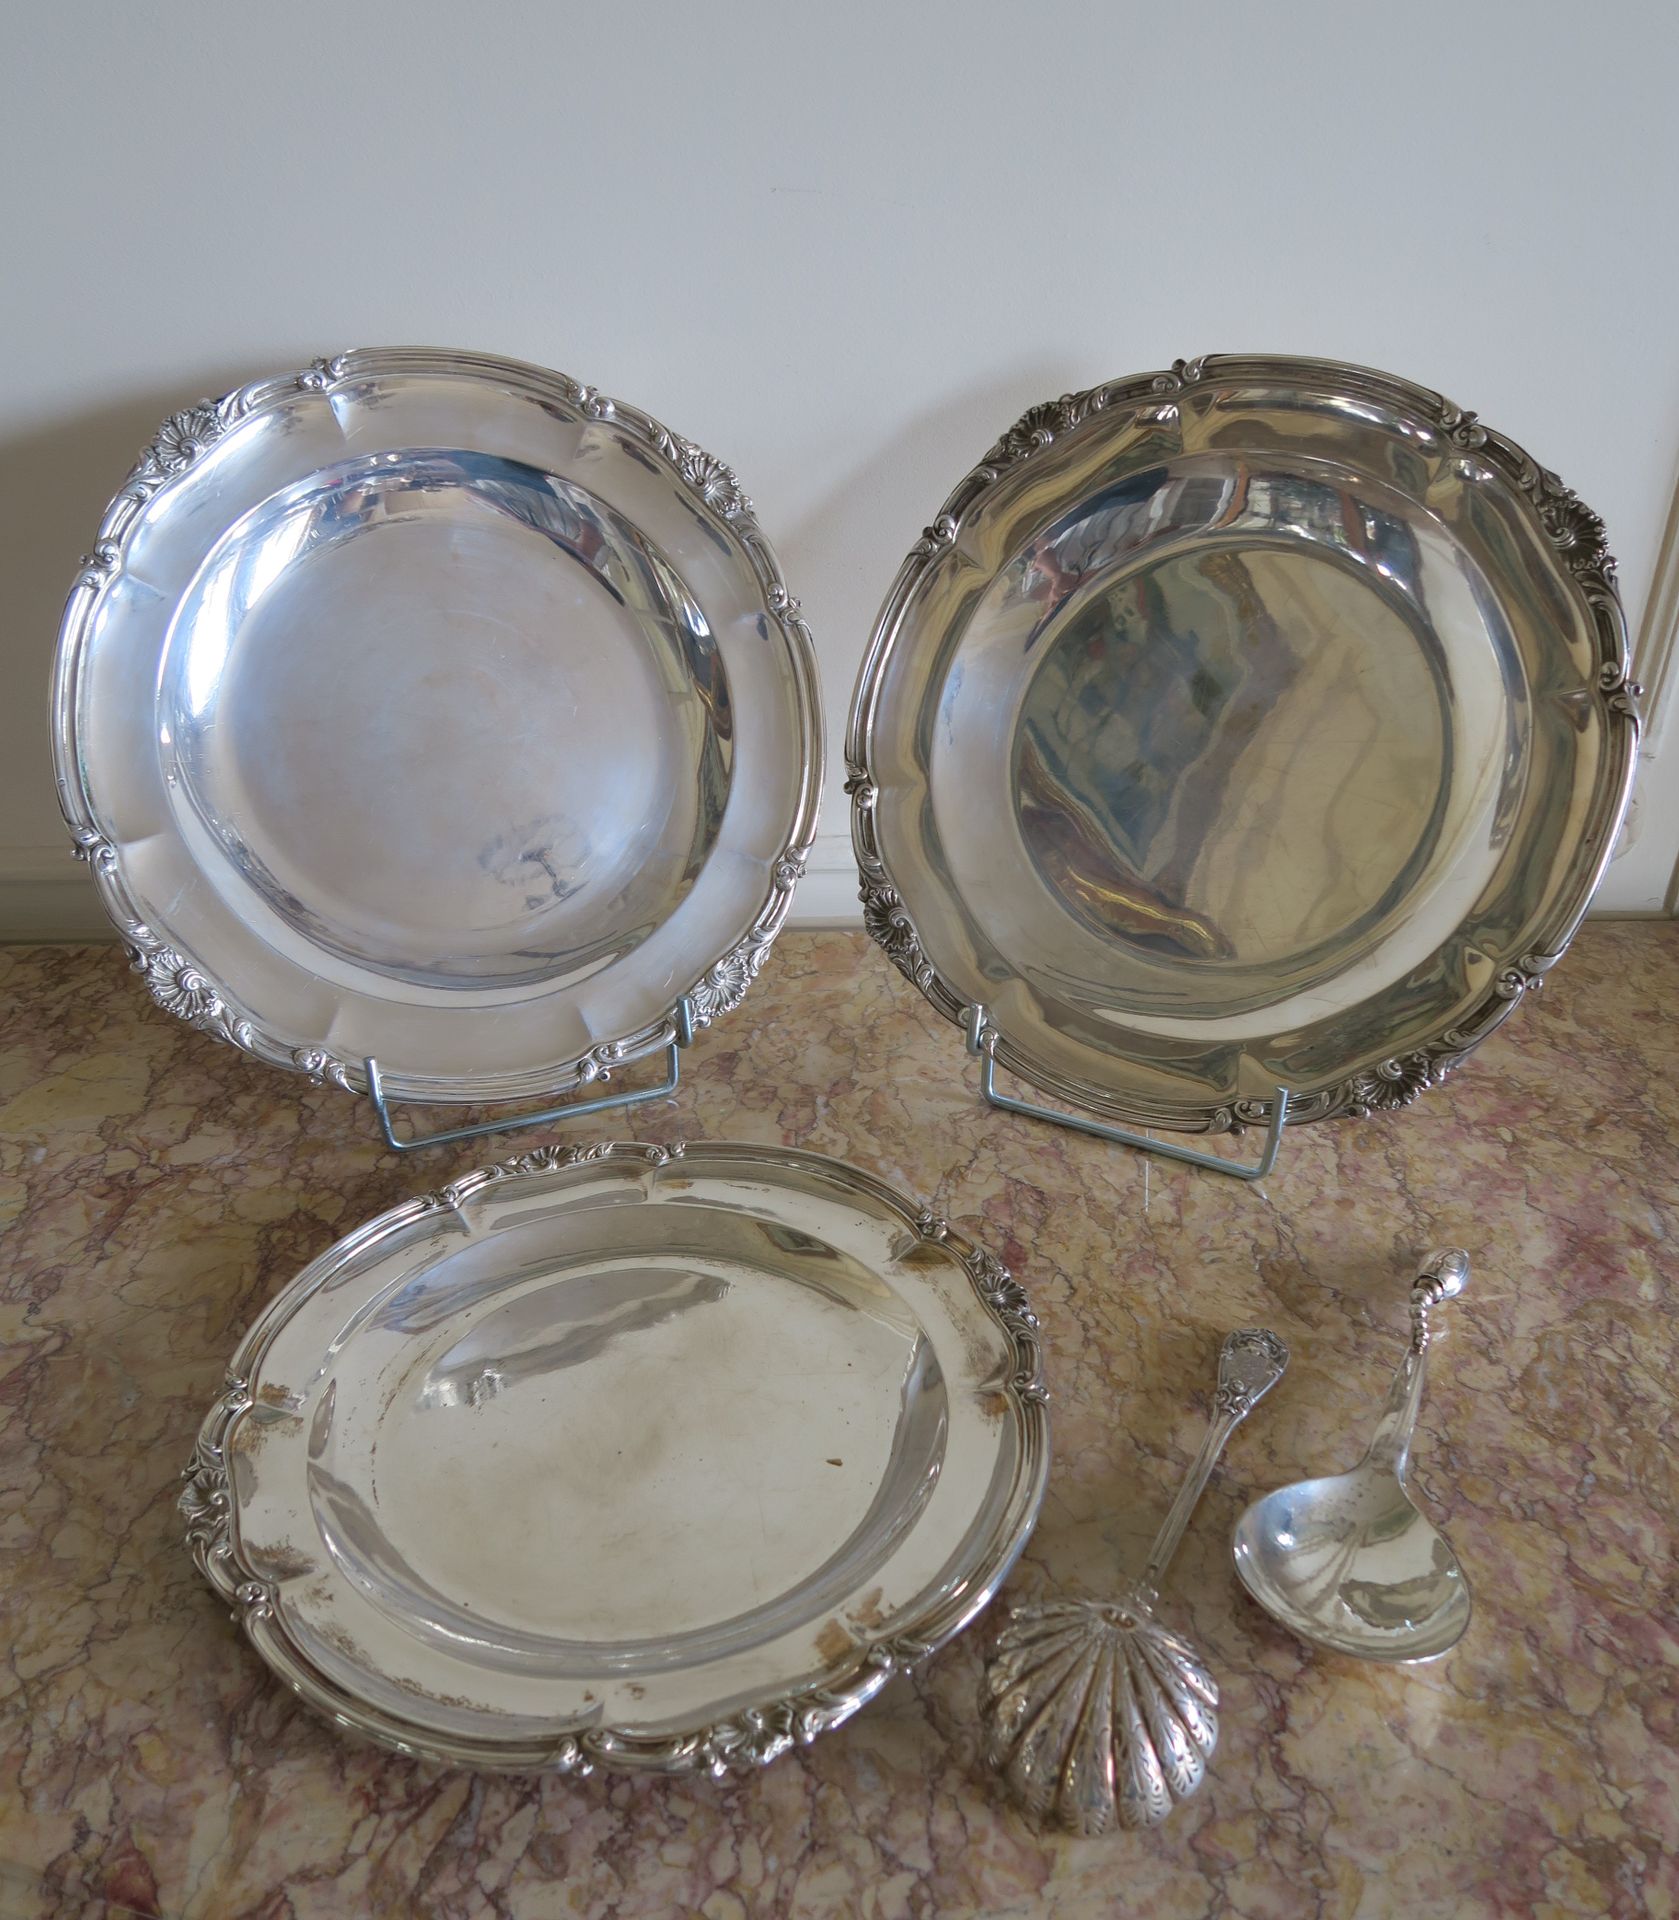 Null Three round silver dishes with rocaille decoration, and serving pieces

D. &hellip;